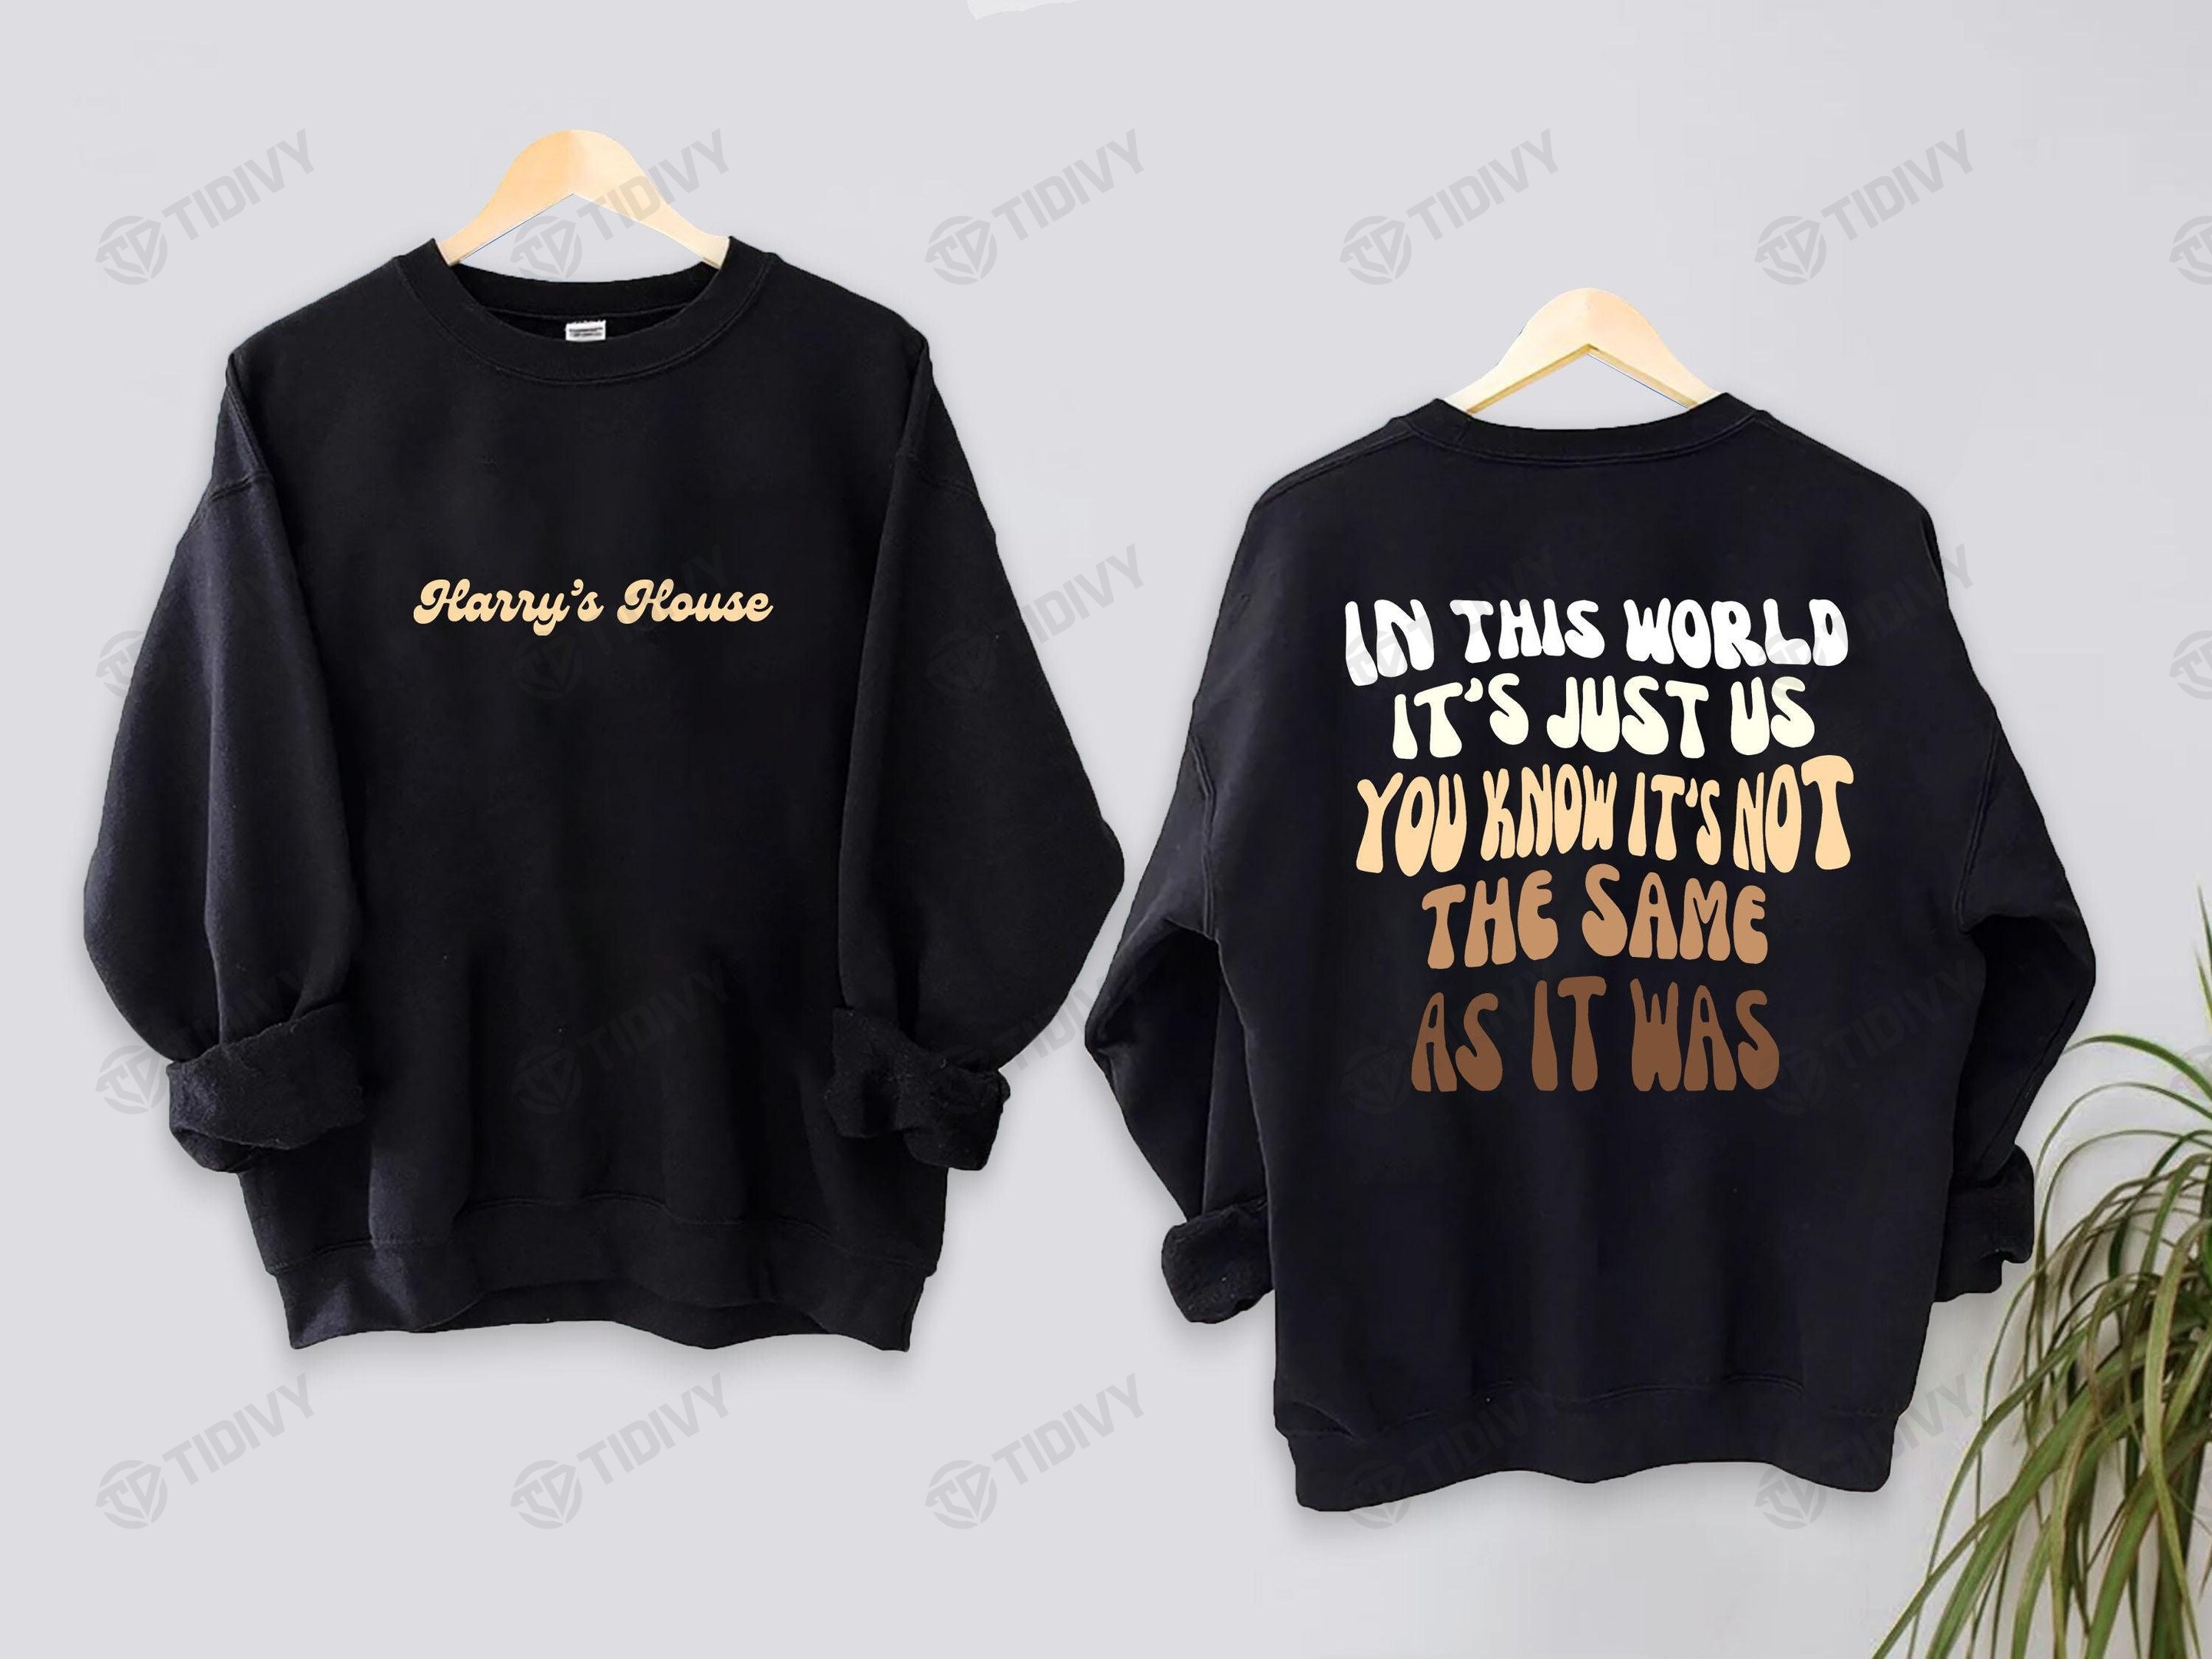 Harry Styles Harry's House Album You Are Home Two Sided Graphic Unisex T Shirt, Sweatshirt, Hoodie Size S - 5XL